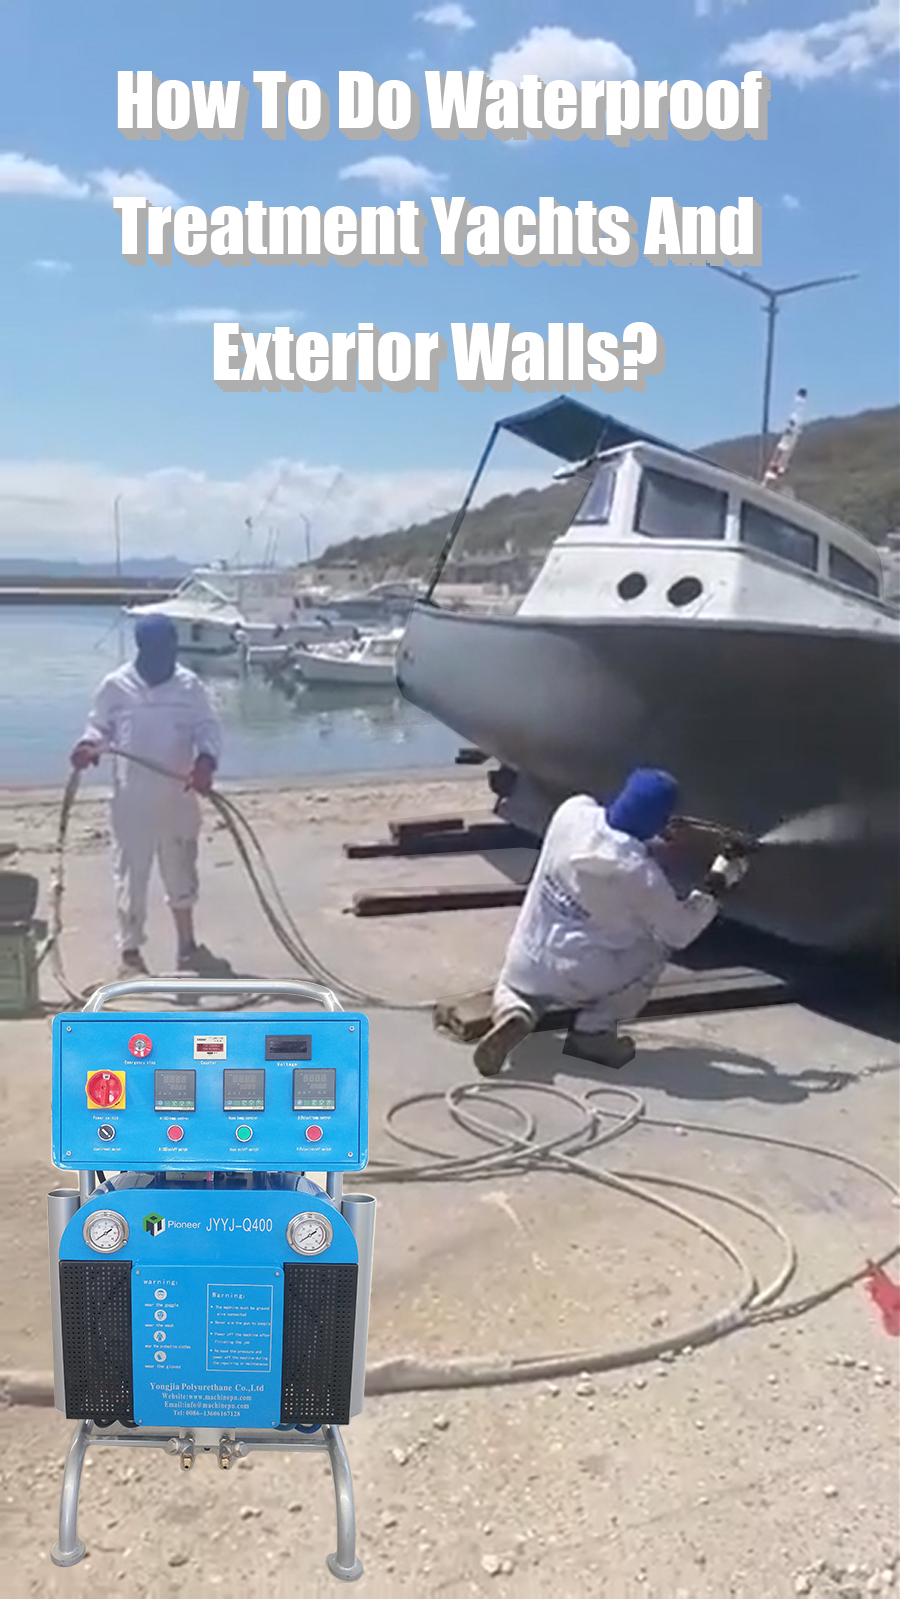 Polyurea Spray Machine | How To Do Waterproof Treatment Yachts And Exterior Walls